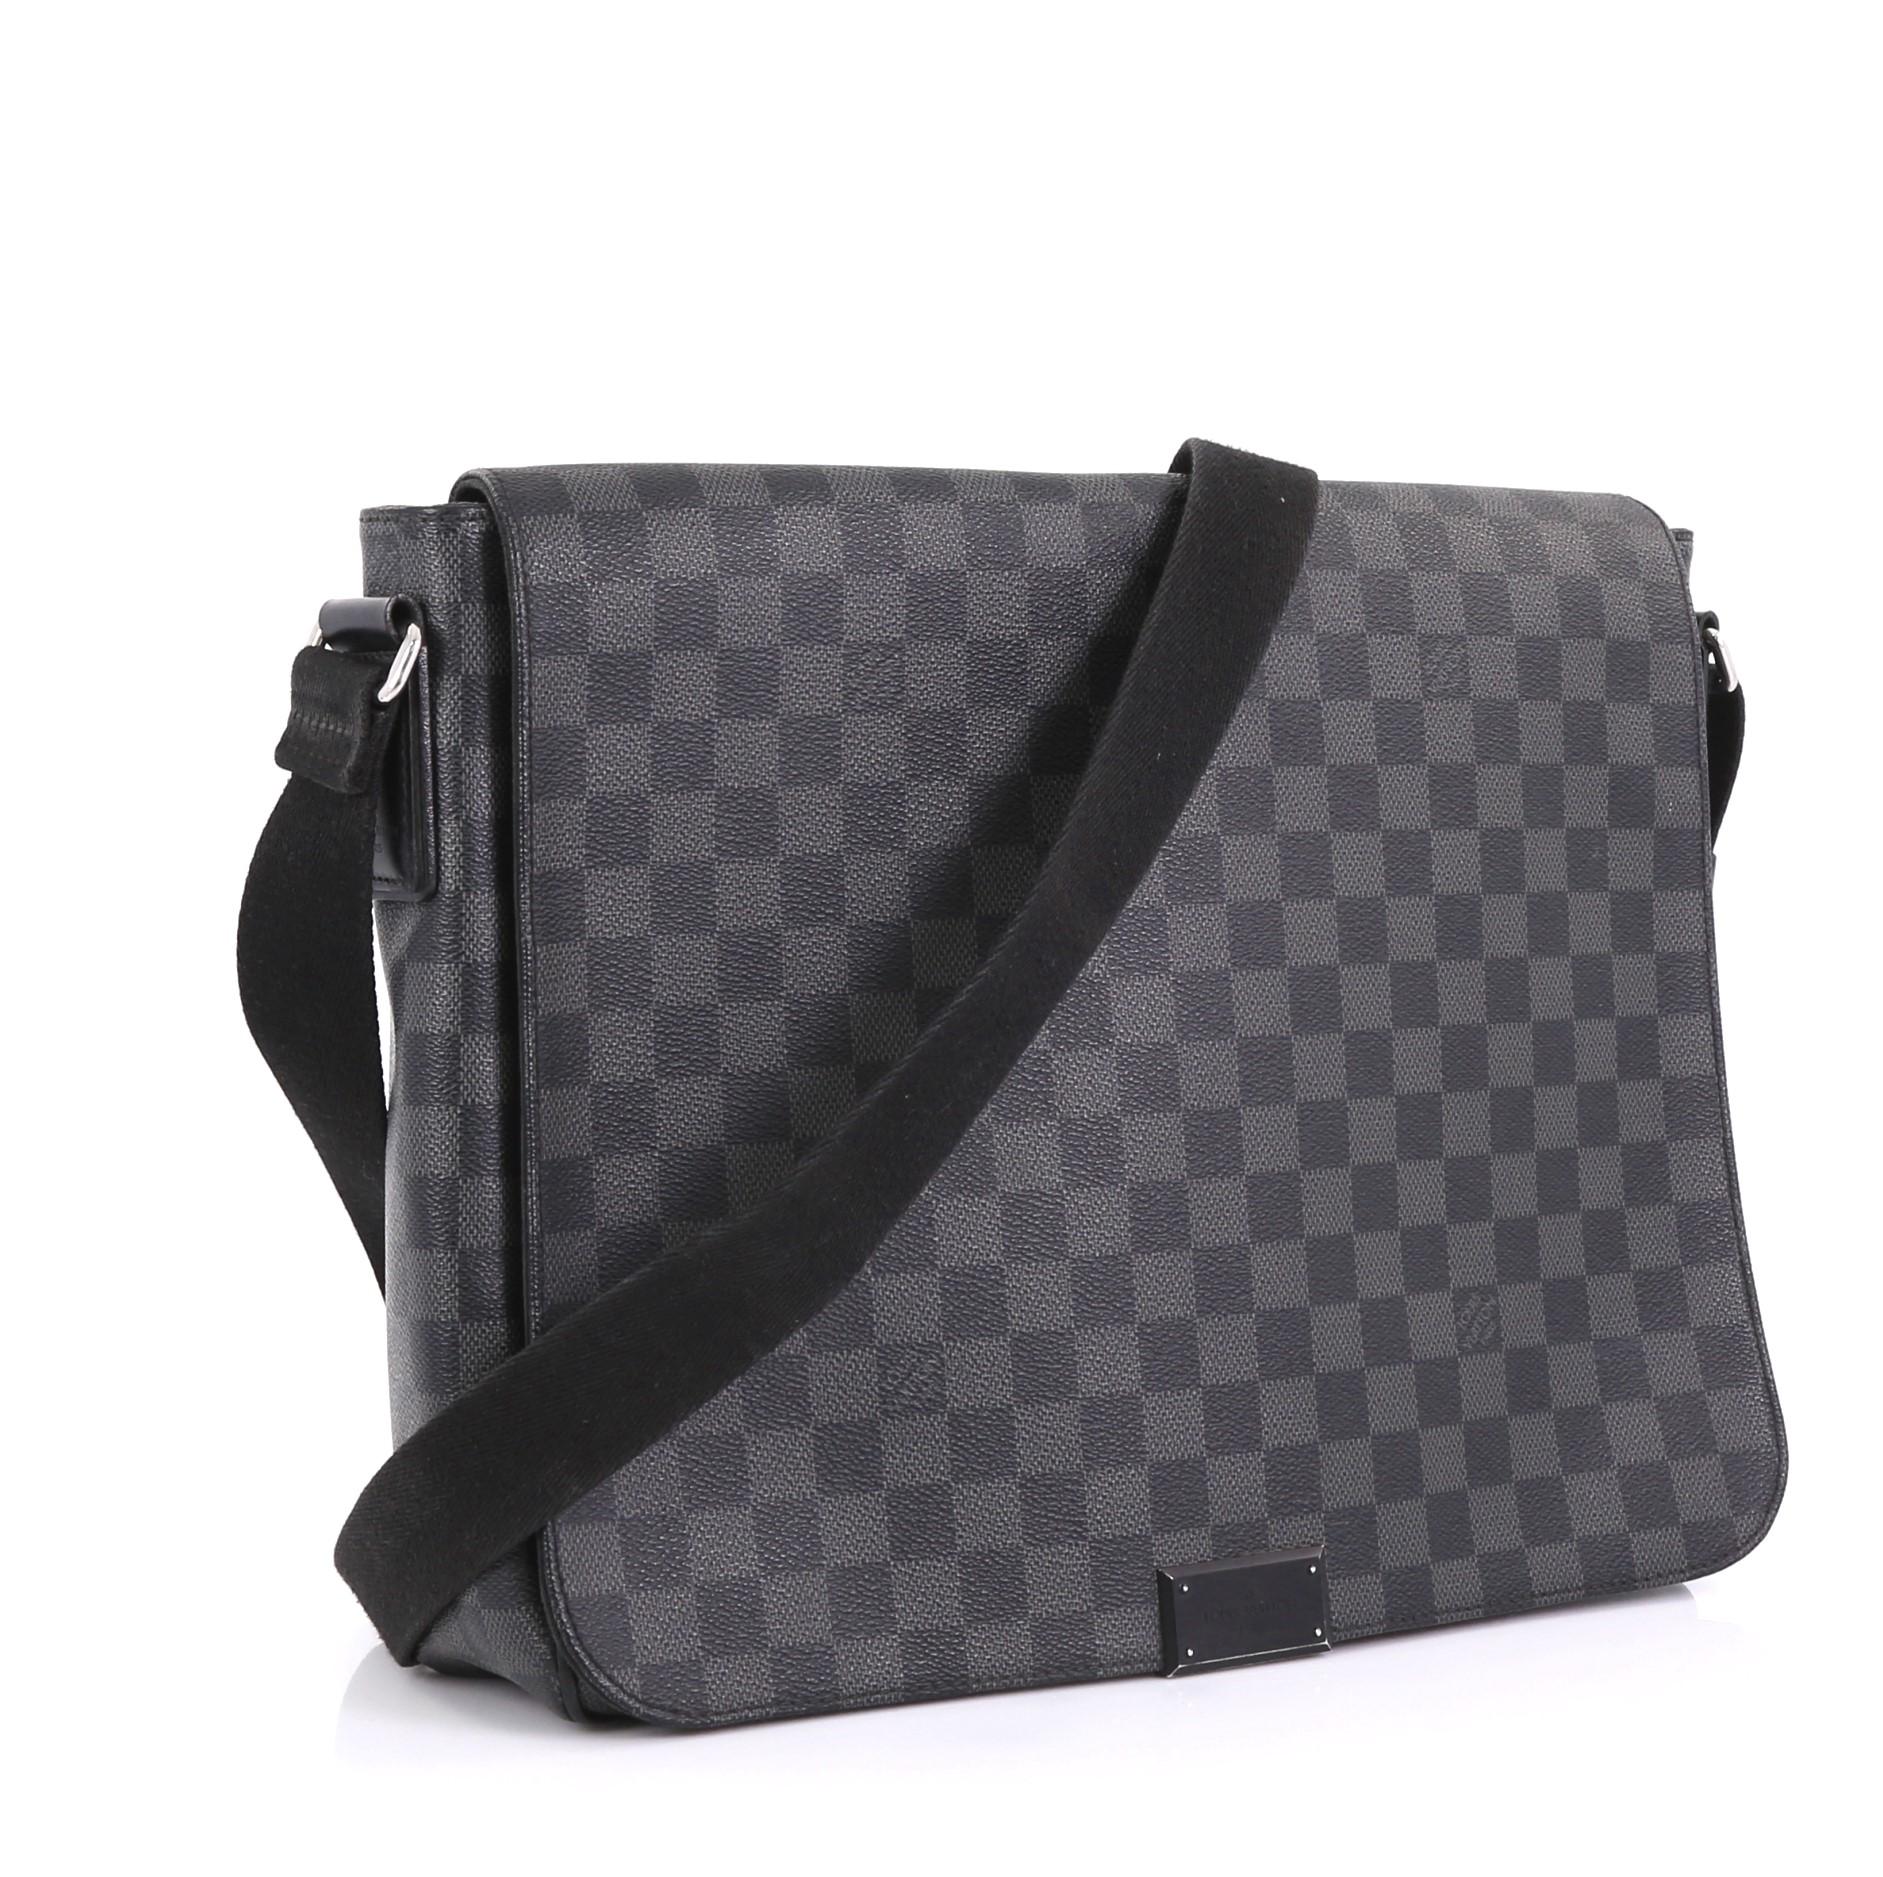 This Louis Vuitton District Messenger Bag Damier Graphite GM, crafted from damier graphite coated canvas, features an adjustable textile shoulder strap, front pocket under flap, exterior back zip pocket, and silver-tone hardware. Its flap opens to a